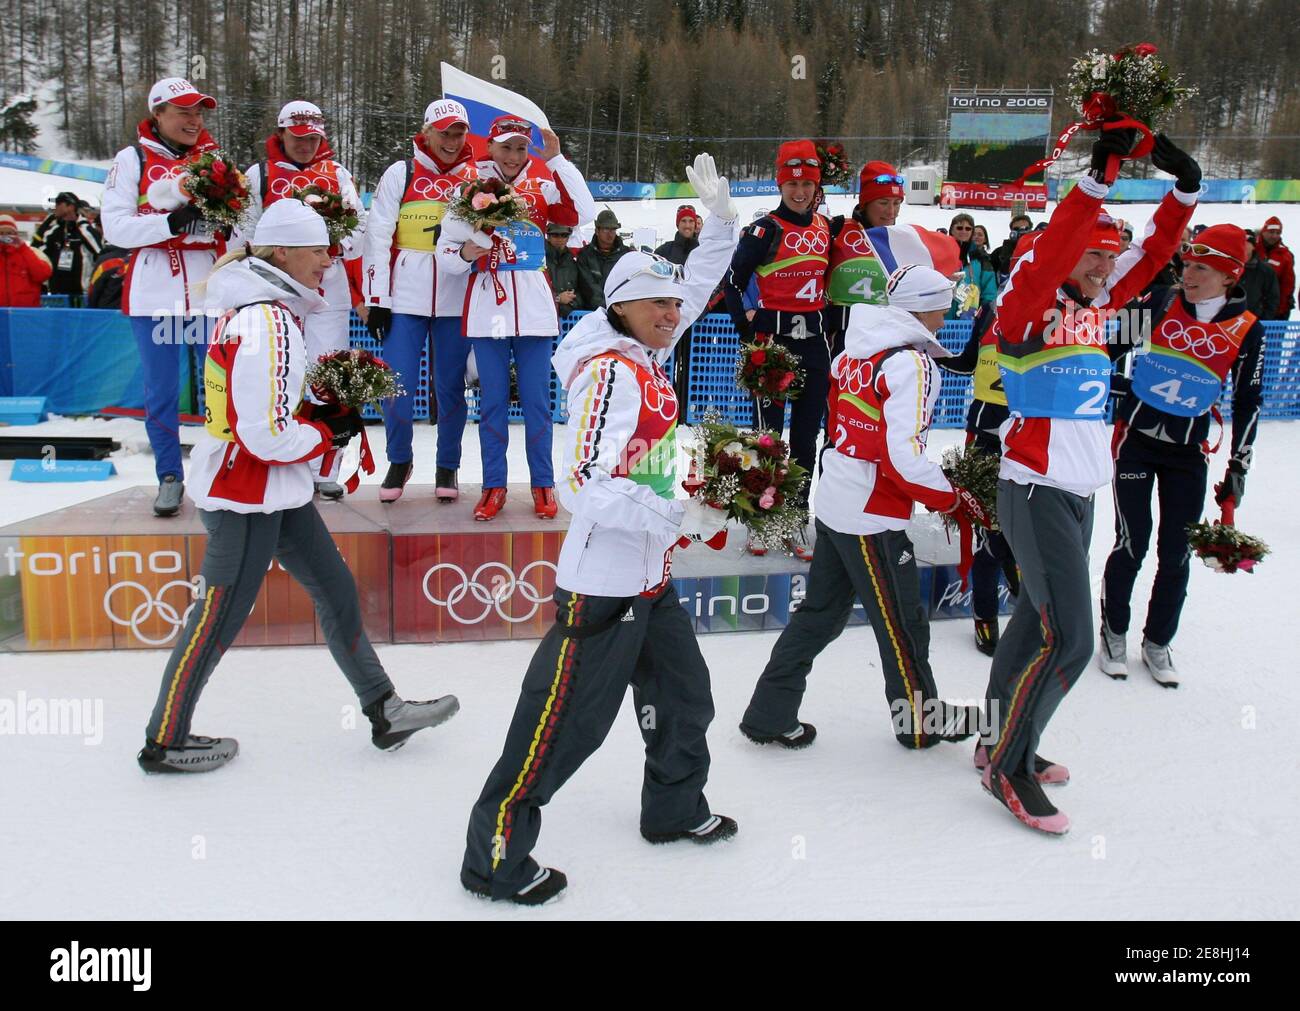 Andrea Henkel (C) of Germany waves to spectators as she leaves the podium with fellow silver medallist team members after the women's 4x6 km biathlon relay event at the Torino 2006 Winter Olympic Games in San Sicario, Italy, February 23, 2006.   REUTERS/Pascal Lauener Stock Photo